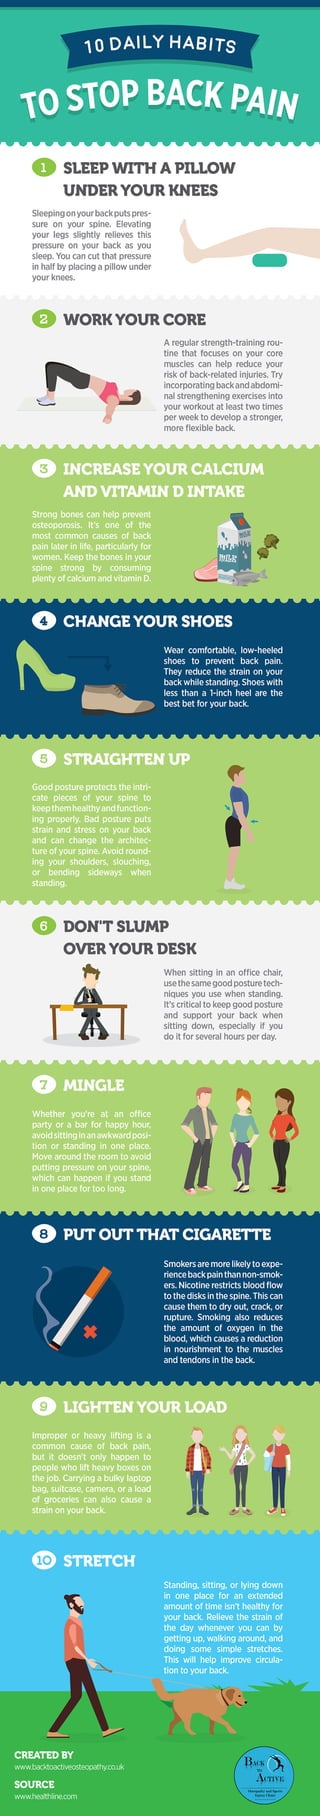 10 daily habits to stop back pain